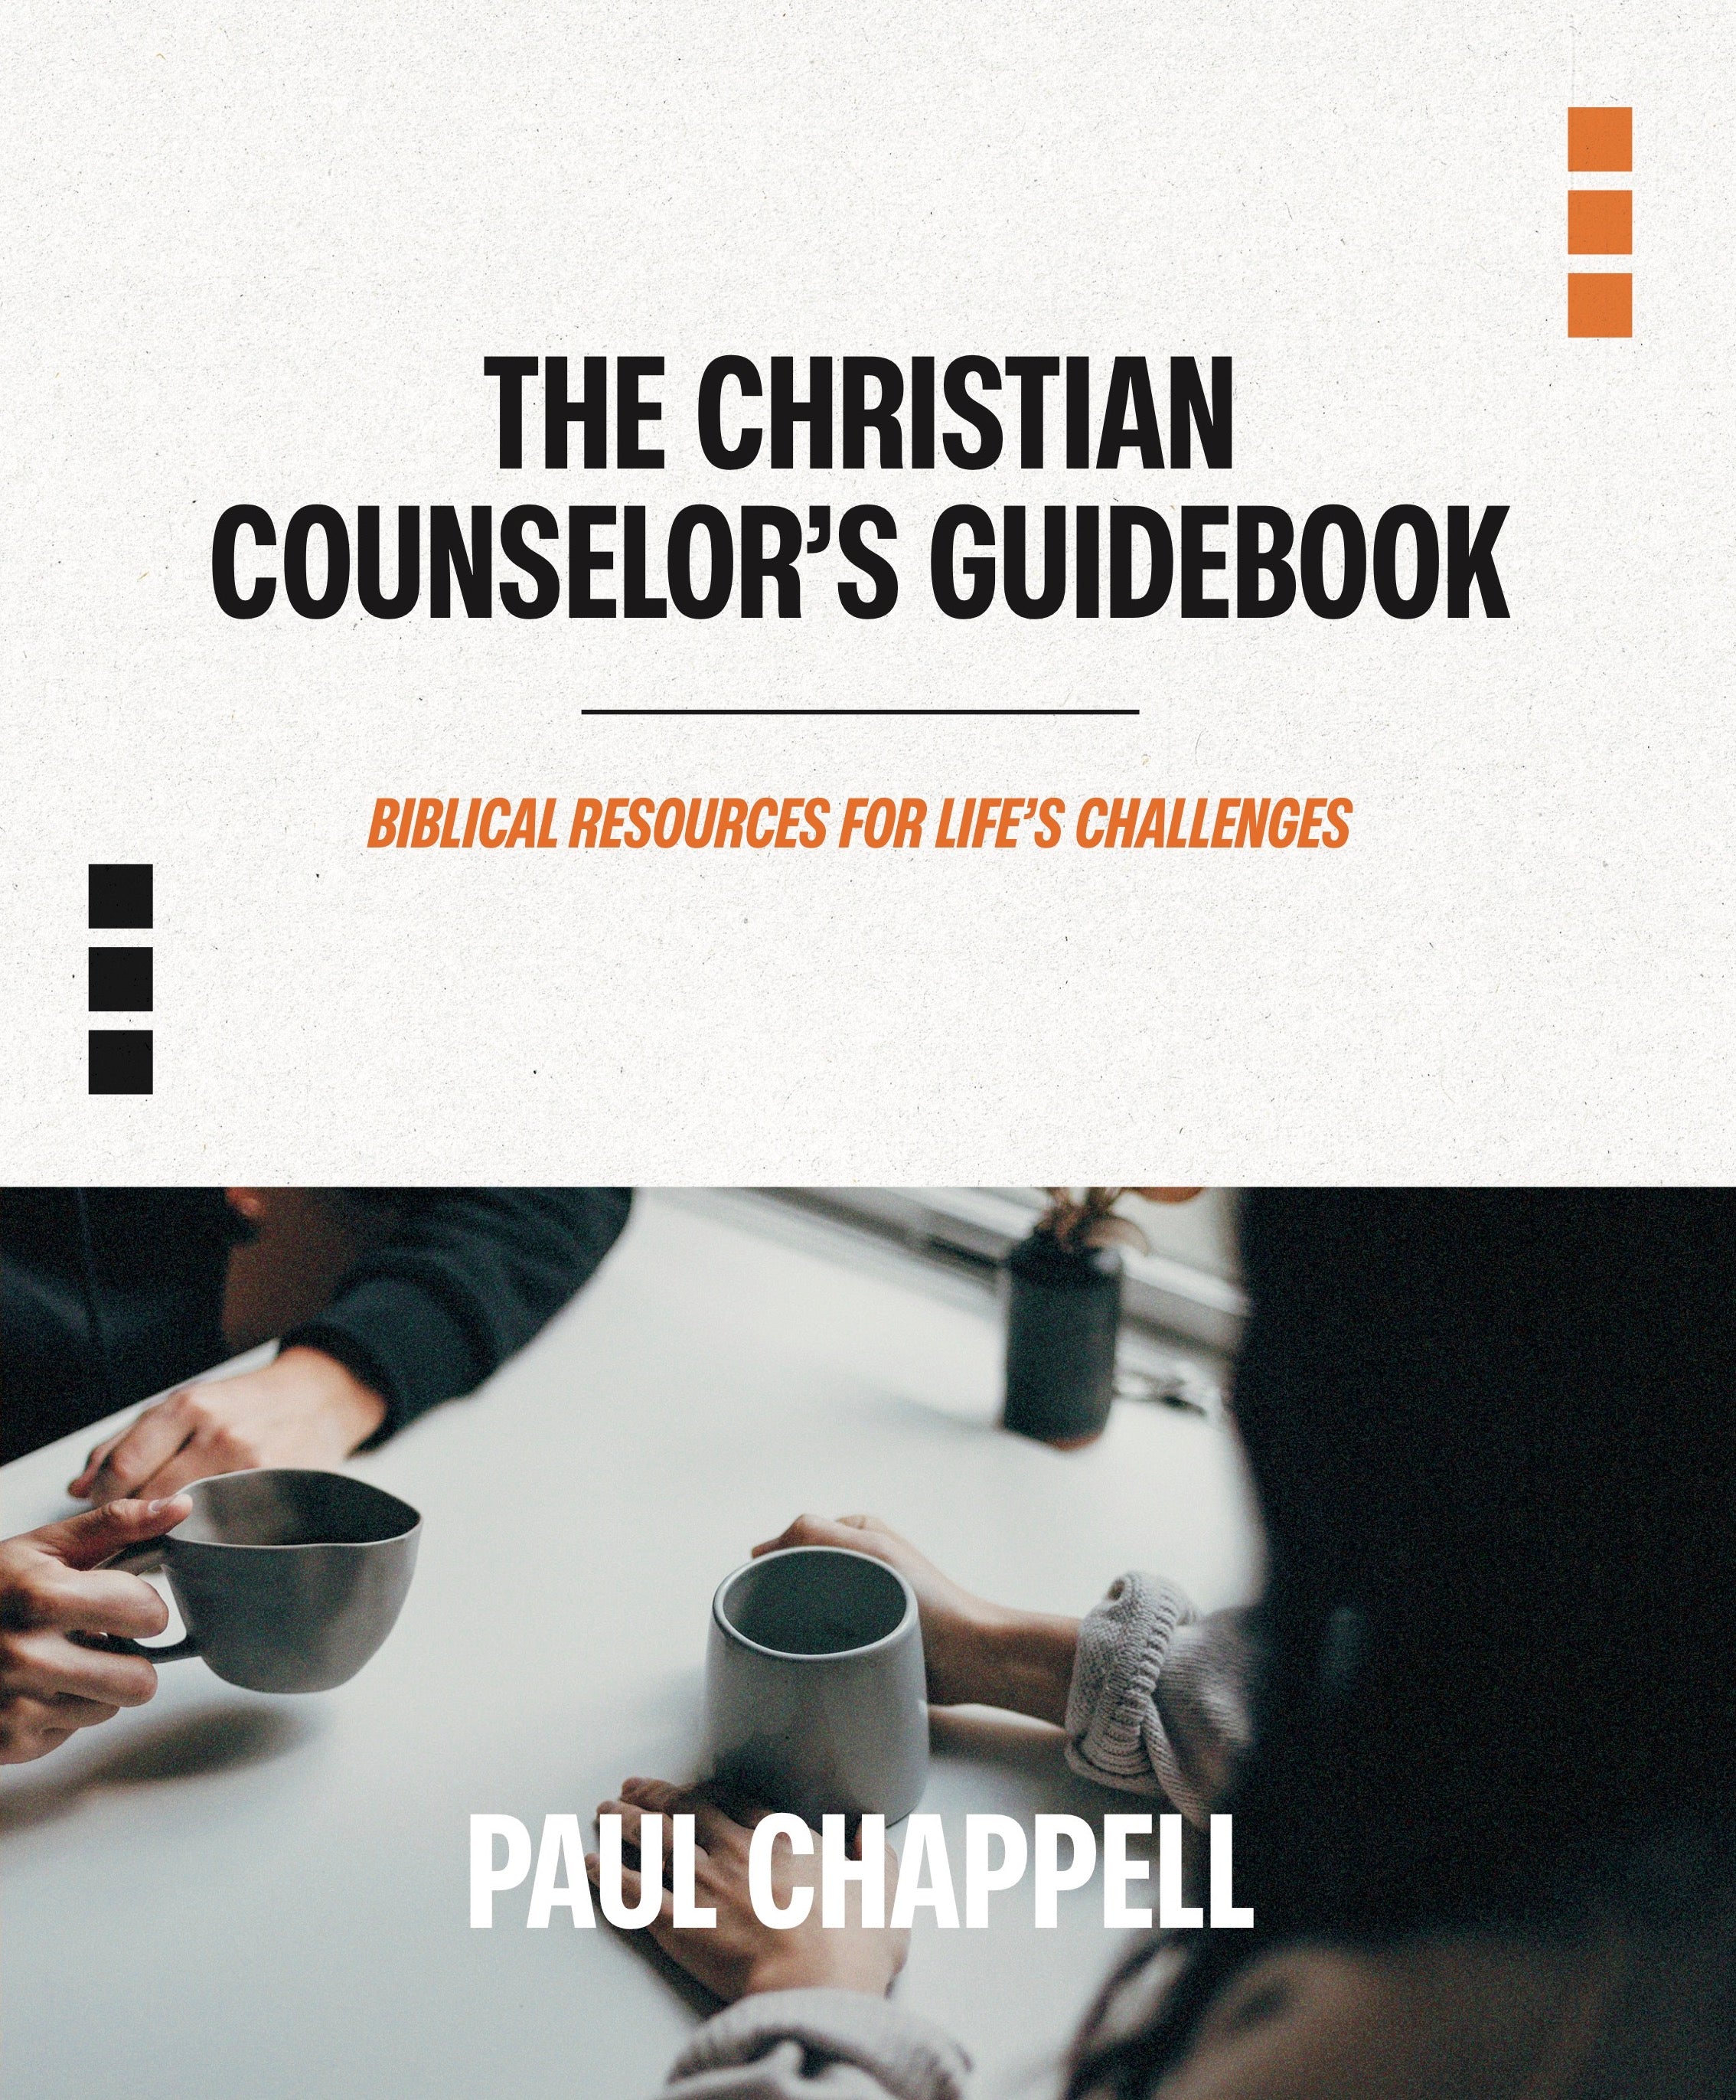 The Christian Counselor's Guidebook